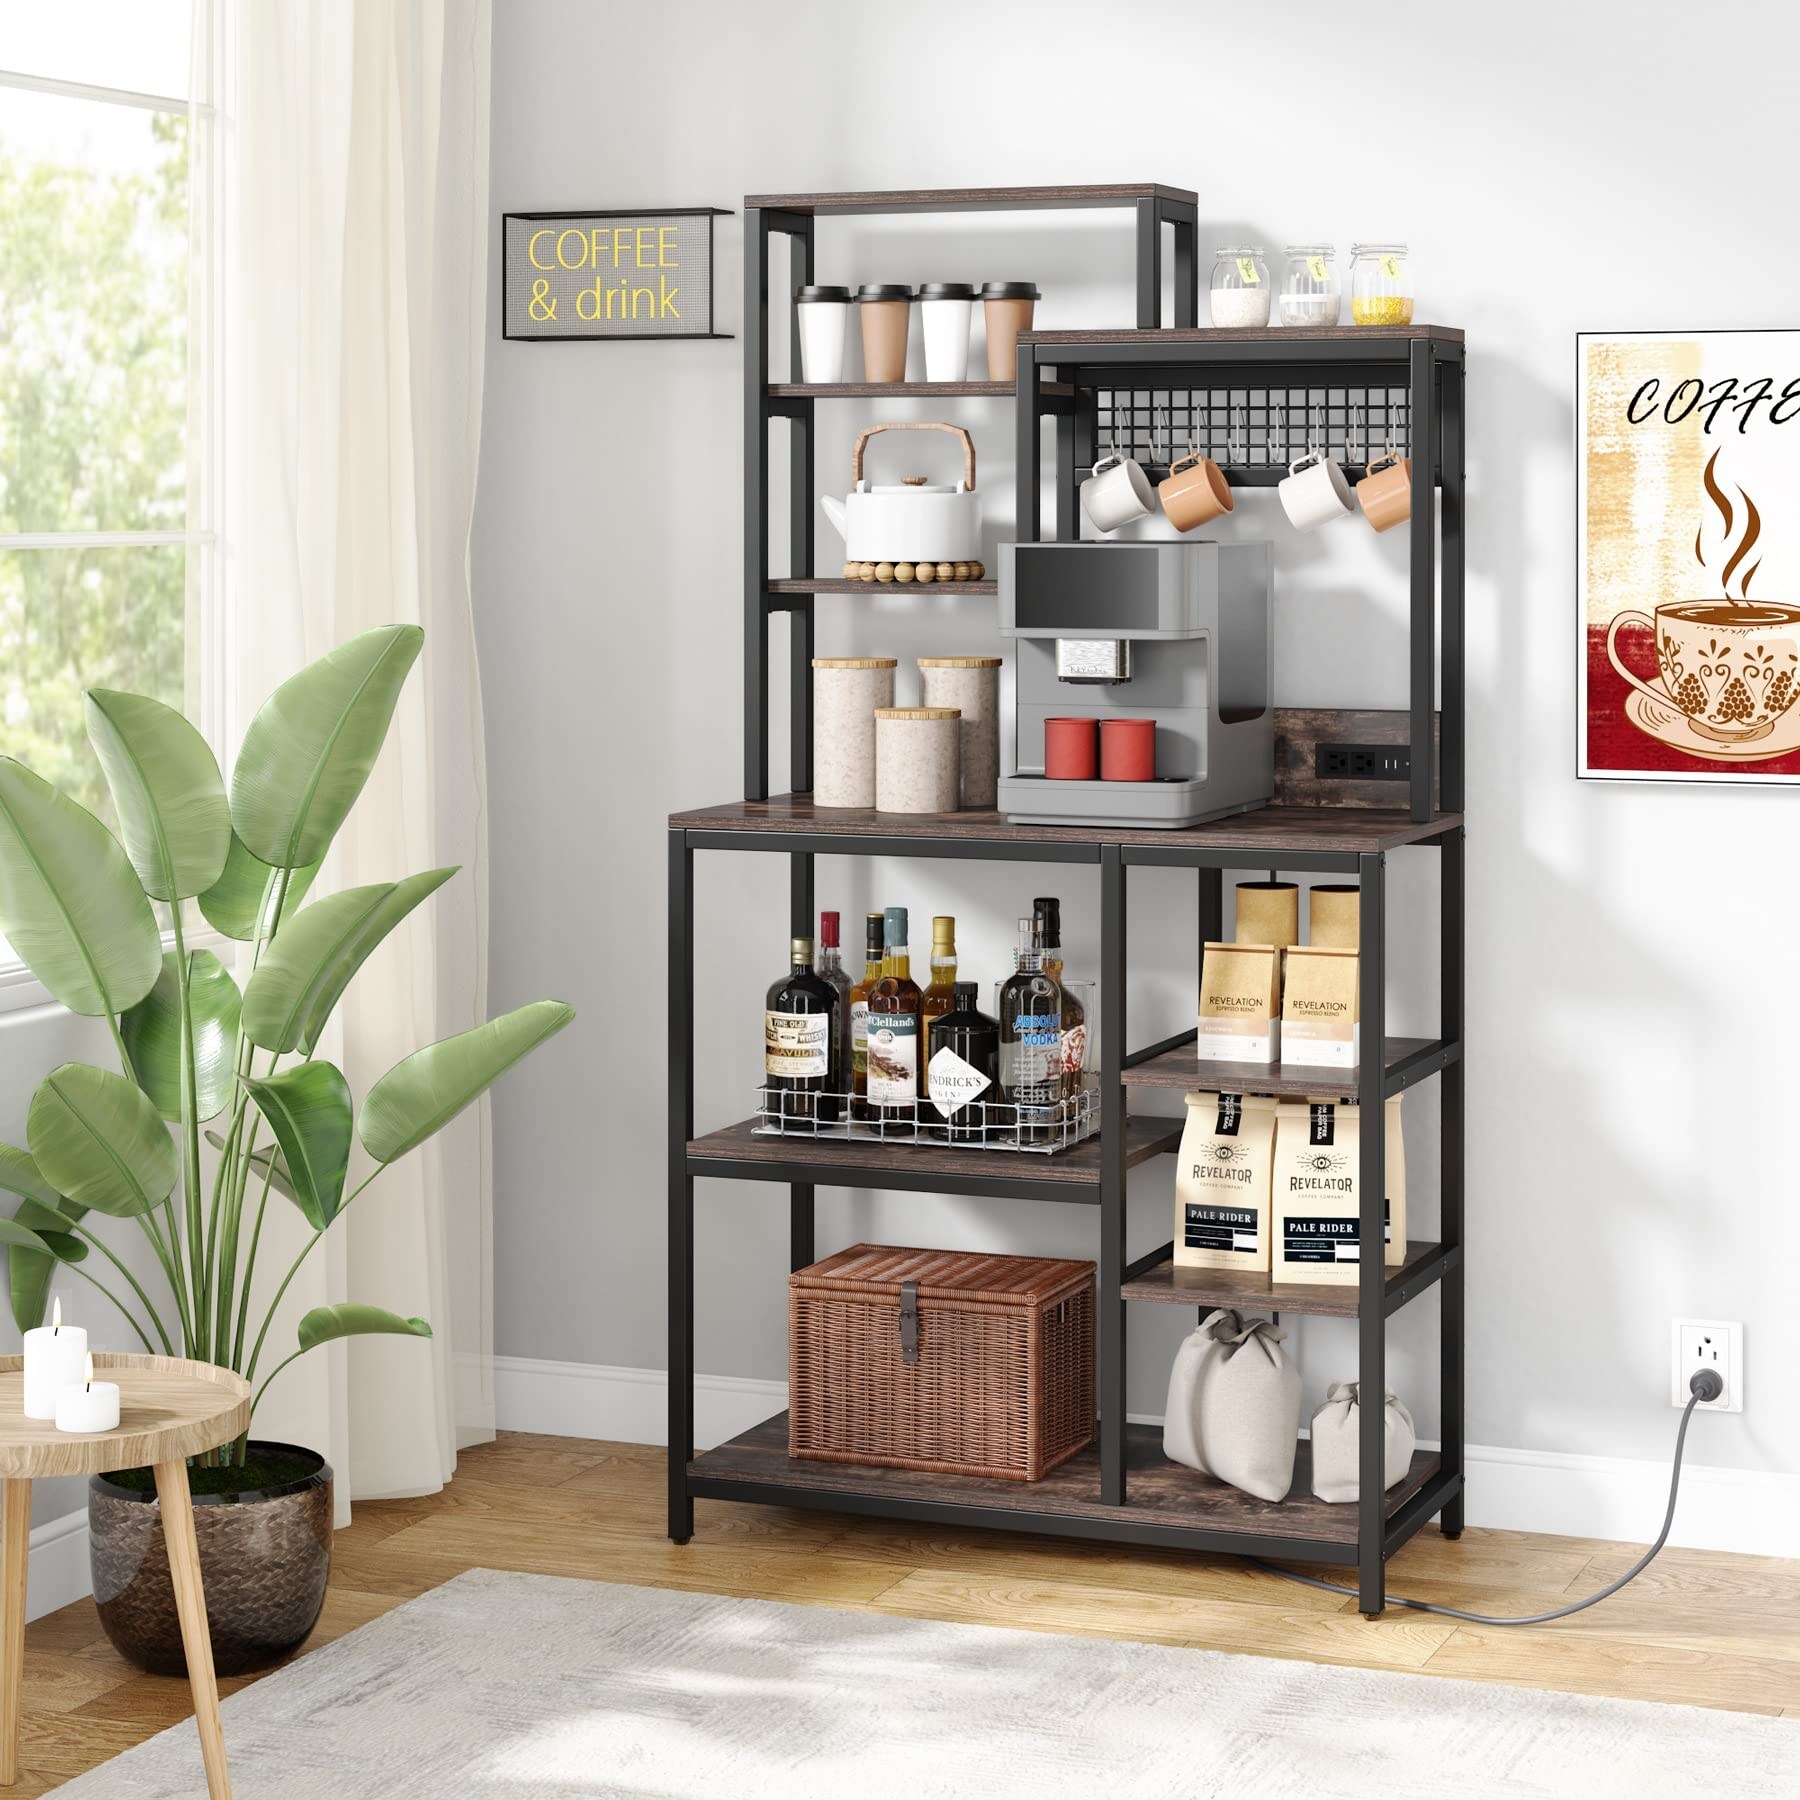 https://ak1.ostkcdn.com/images/products/is/images/direct/990f36fa051edcea66e556e8181ed8799ed24c1d/Bakers-Rack-with-Power-Outlet%2C-9-Tier-Kitchen-Utility-Storage-Shelf-with-8-S-Hooks%2C-Rustic-Brown.jpg